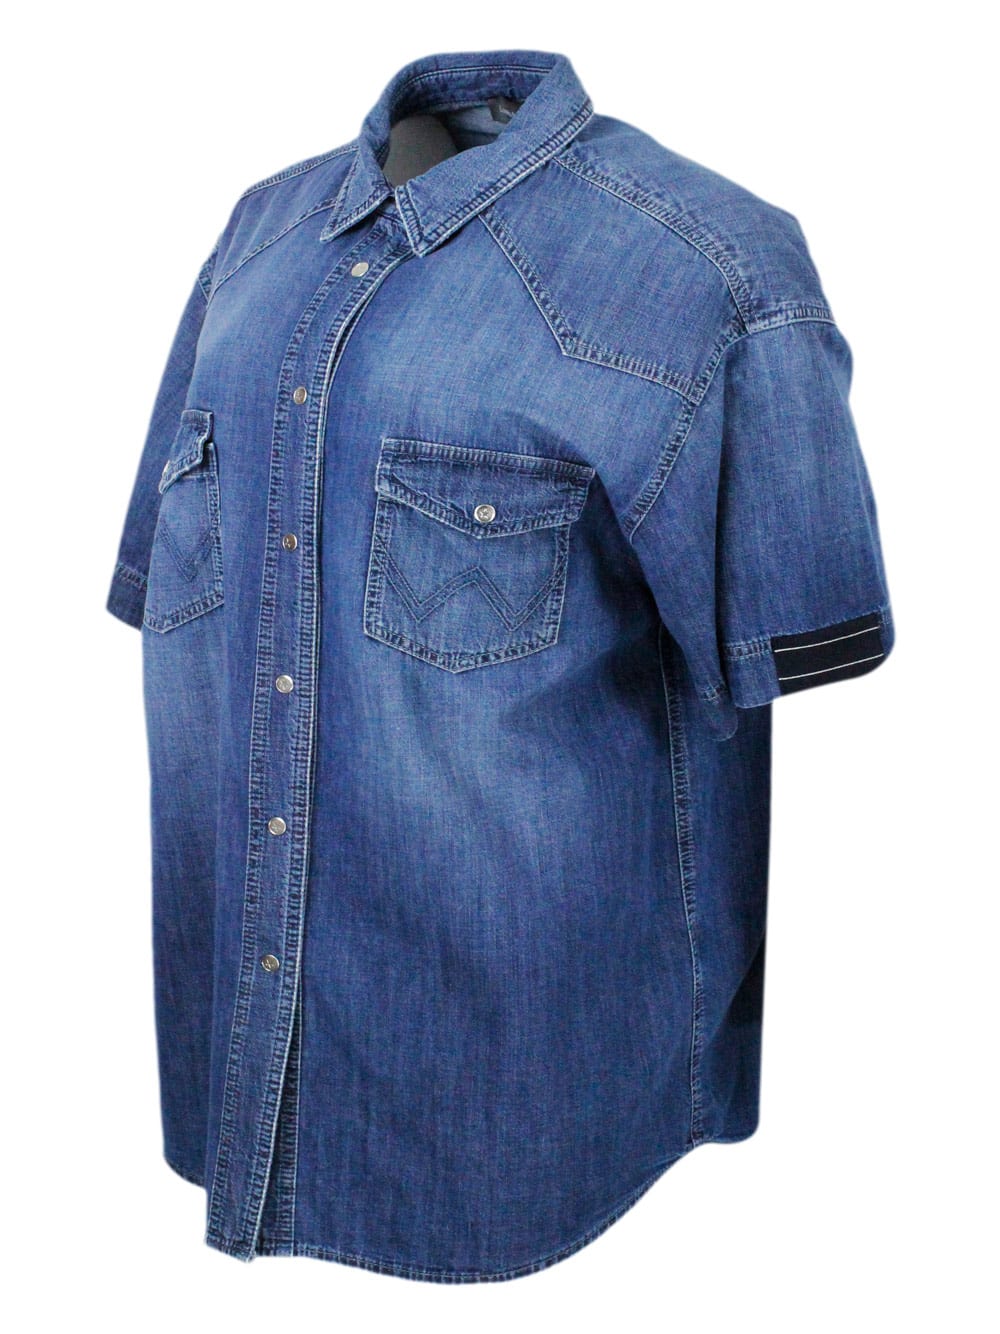 Shop Lorena Antoniazzi Long Shirt In Light Chambray Denim Cotton With Short Sleeves With Button Closure And Patch Pockets, 